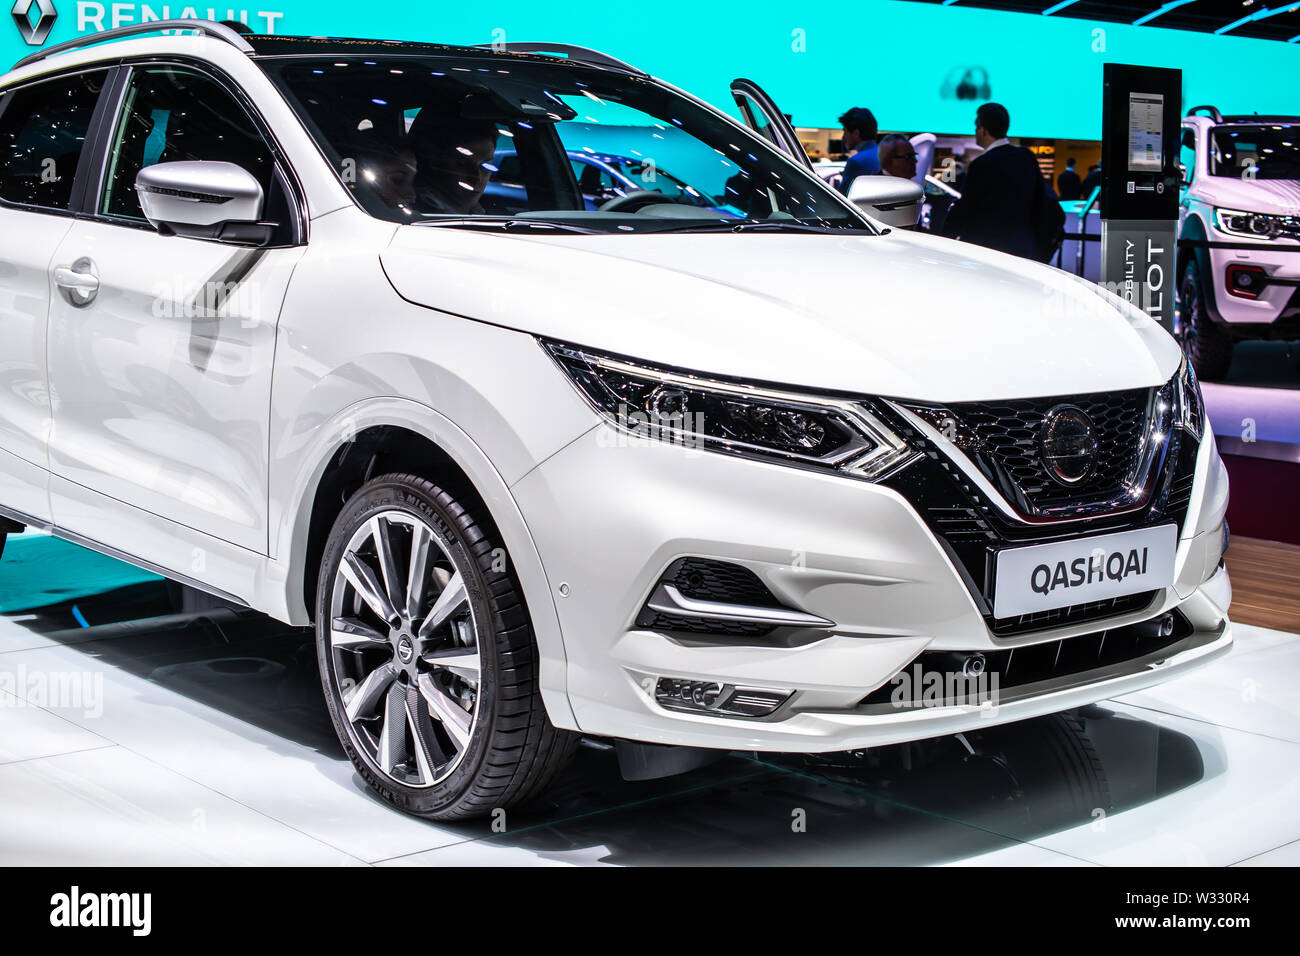 Brussels, Belgium, Jan 2019: Nissan Qashqai, Brussels Motor Show, 2nd gen,  J11, compact crossover SUV produced by Japanese car manufacturer Nissan  Stock Photo - Alamy